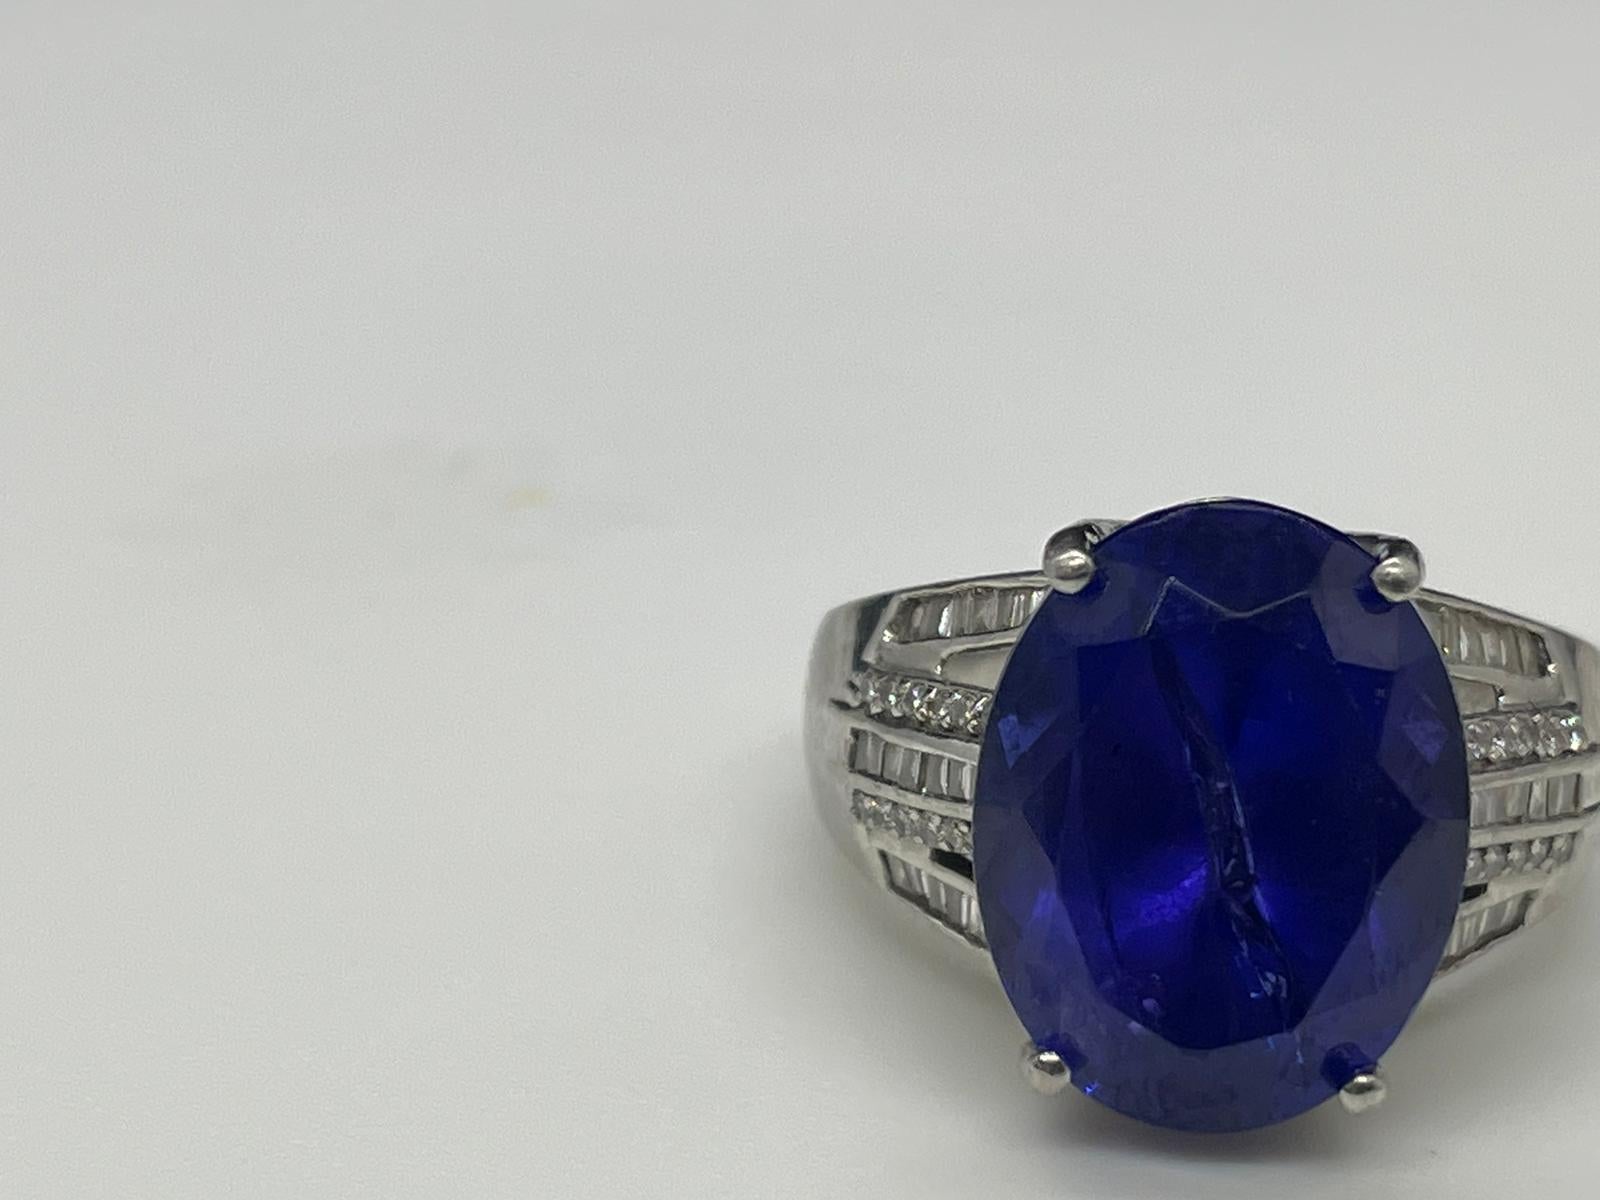 Stunning collector's piece with 11.55 CTW Tanzanite with .45 CTW sparkling E/F color and VS2 clarity diamonds.  The Tanzanite is a vivid blue/purple expertly crafted in luxurious 12.0g of platinum and would be a great engagement ring.  

Size:  8.5